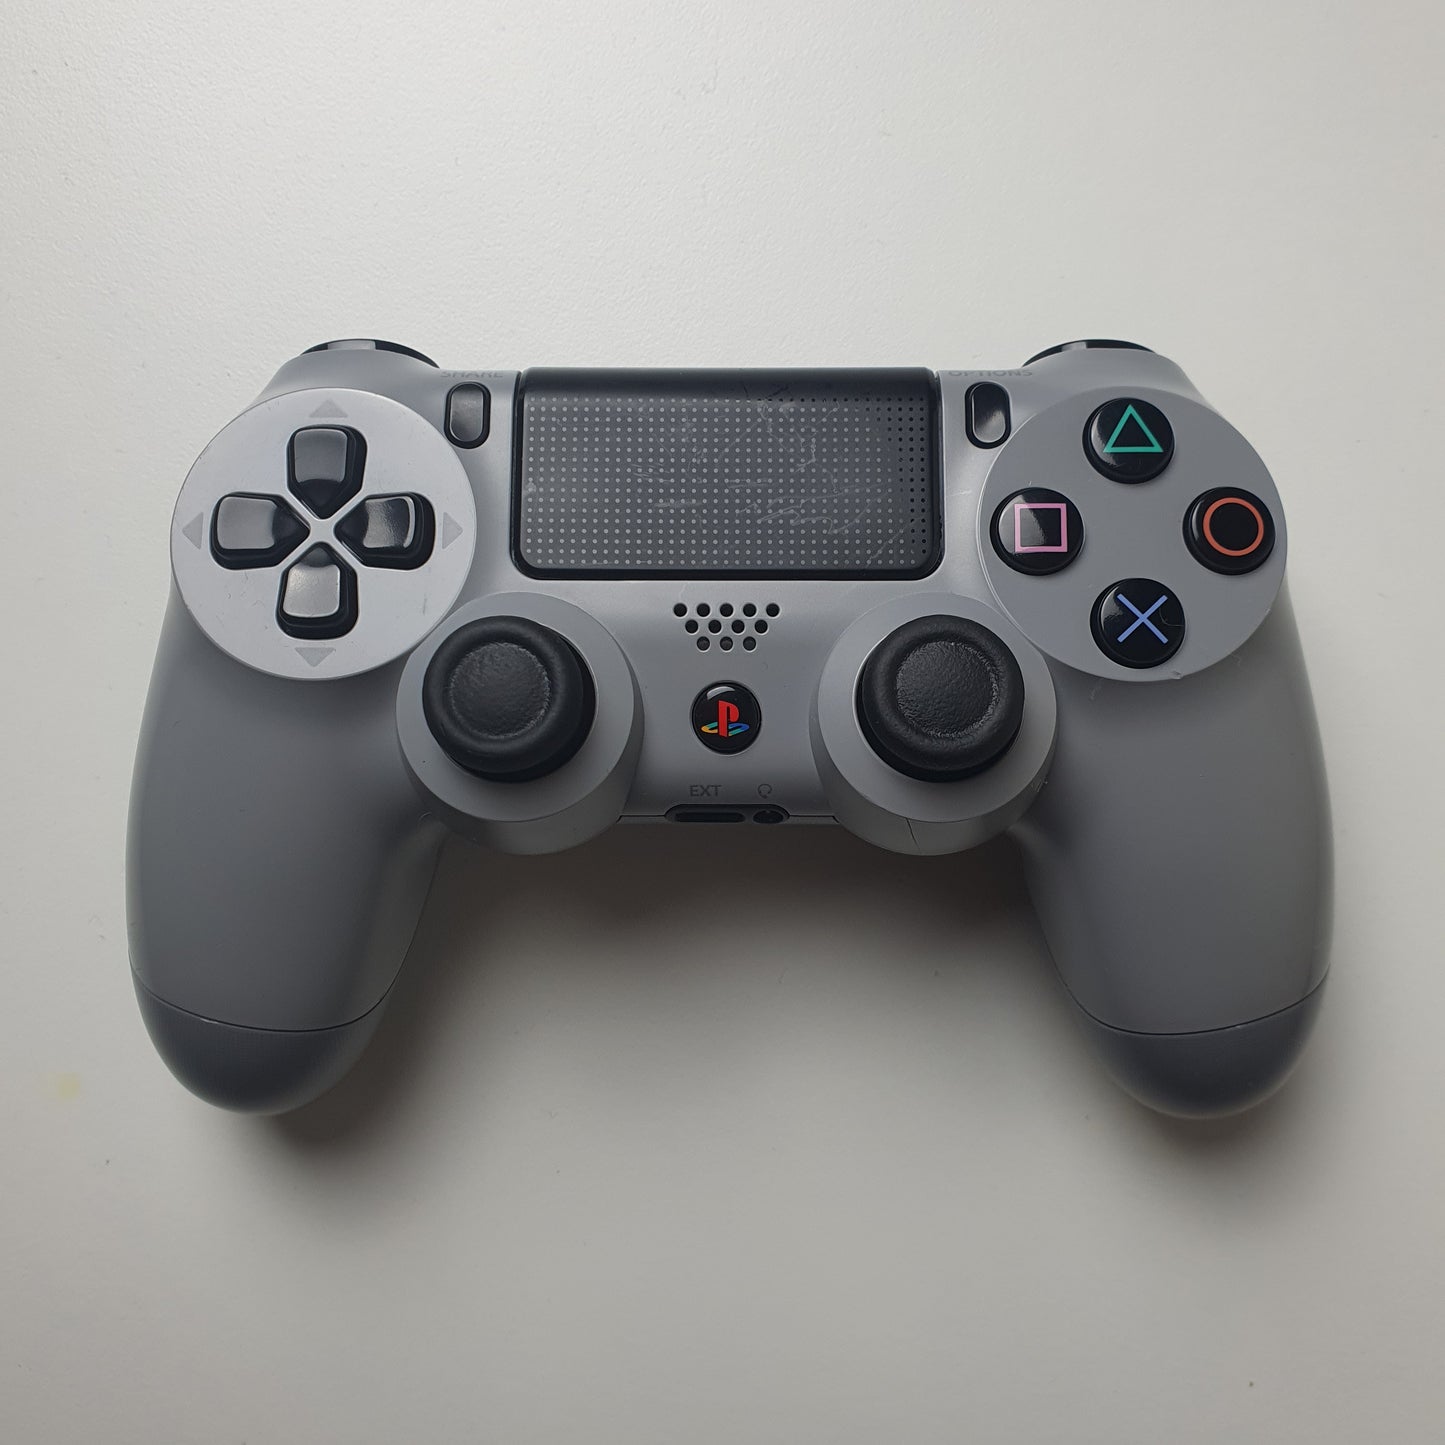 Official Sony PlayStation PS4 DualShock 4 Limited Edition 20th Anniversary Wireless Controller